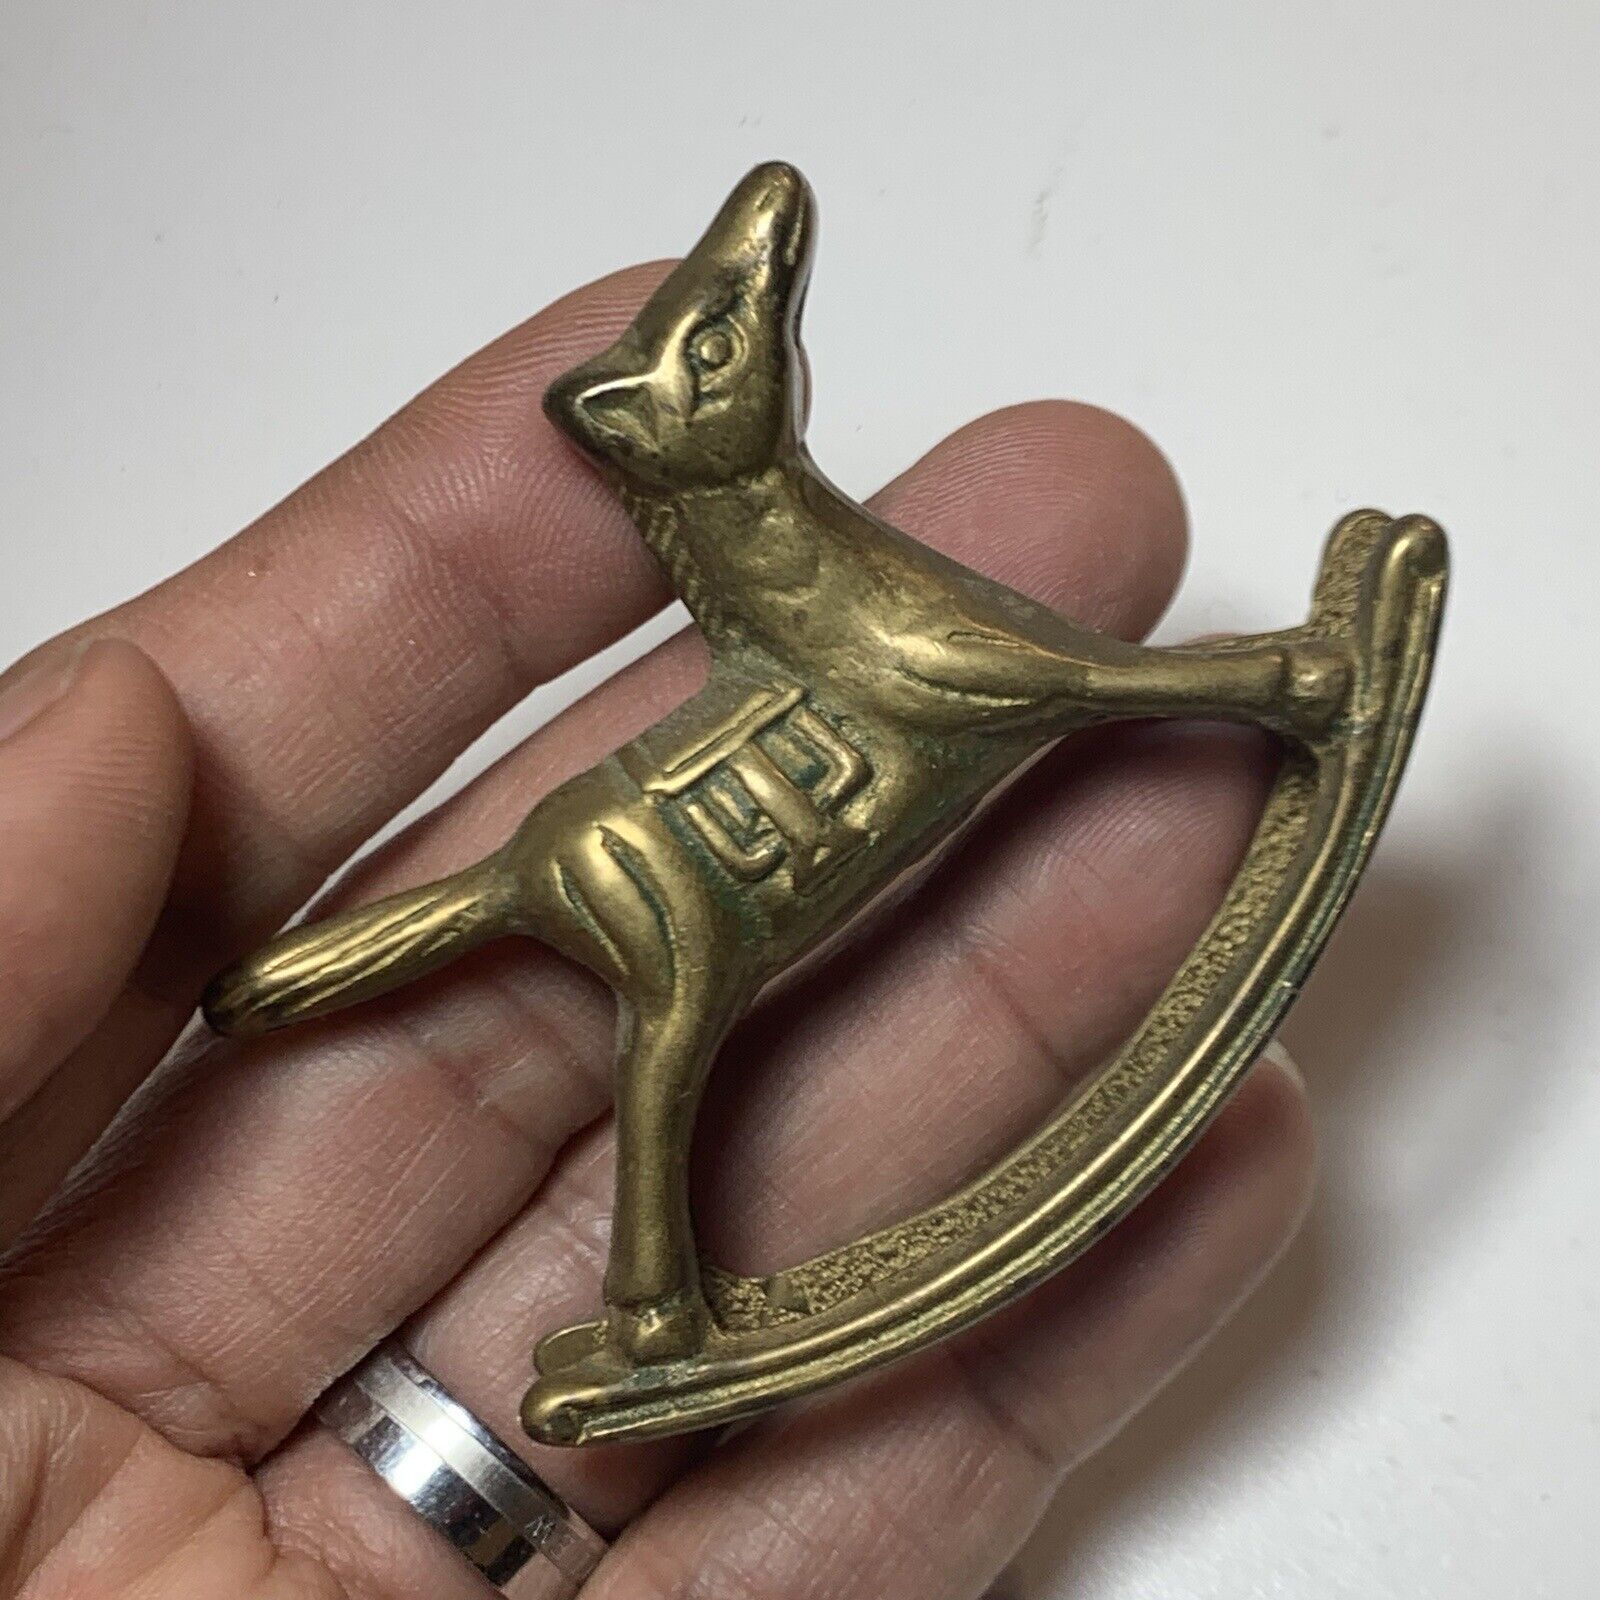  Rocking Horse Figurine Small Solid Brass Vintage 